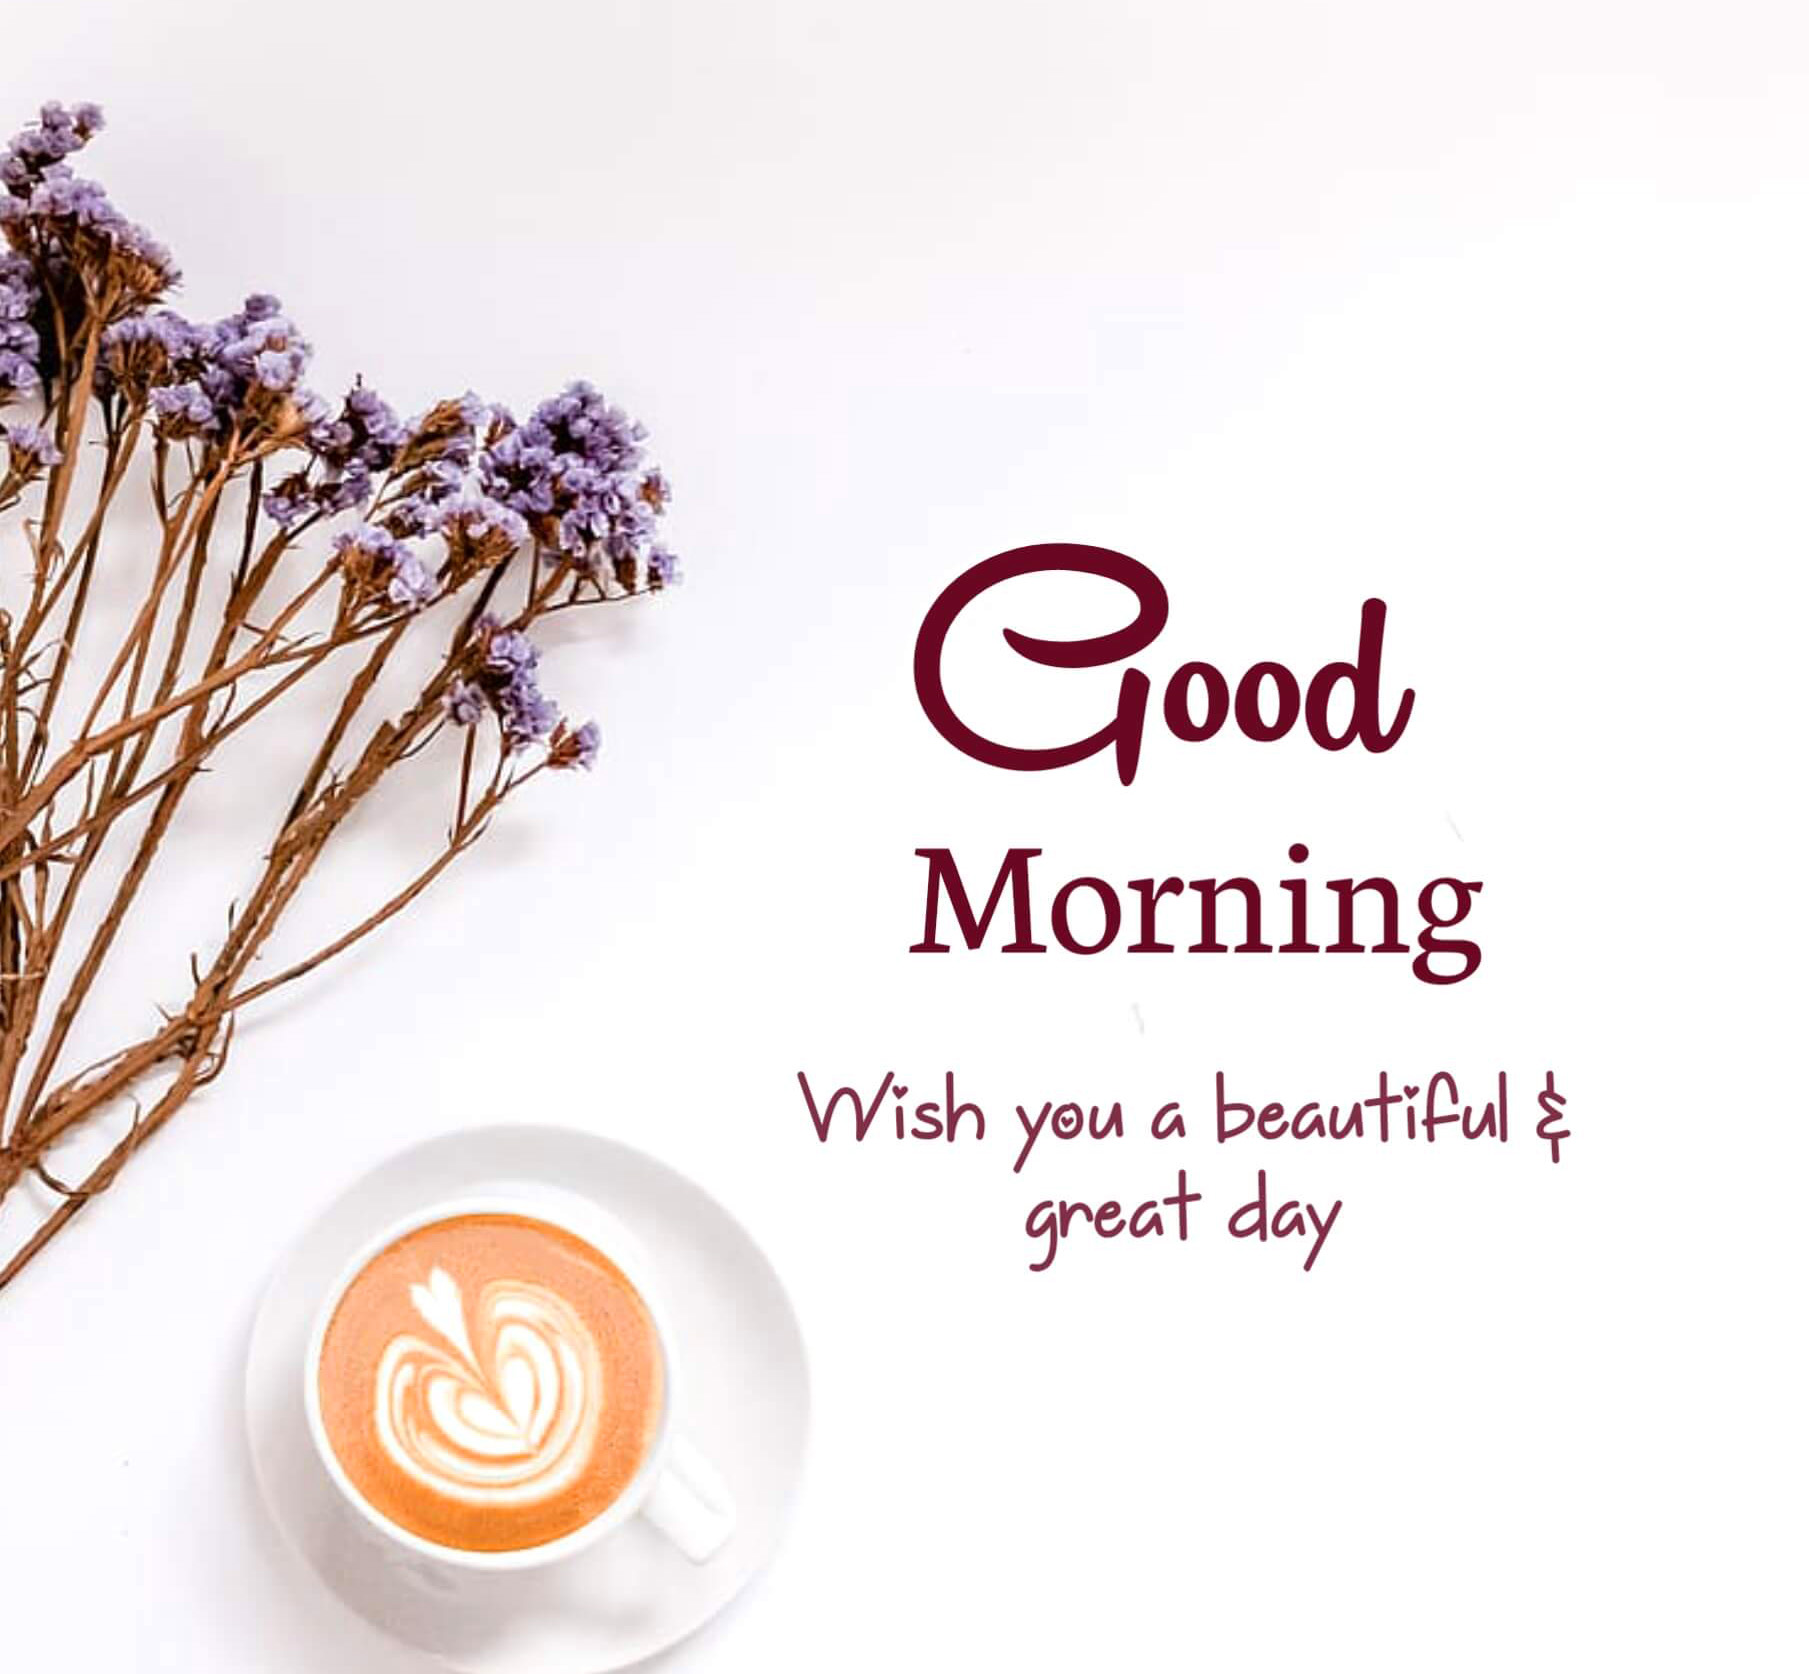 Good Morning Images 1080p Download